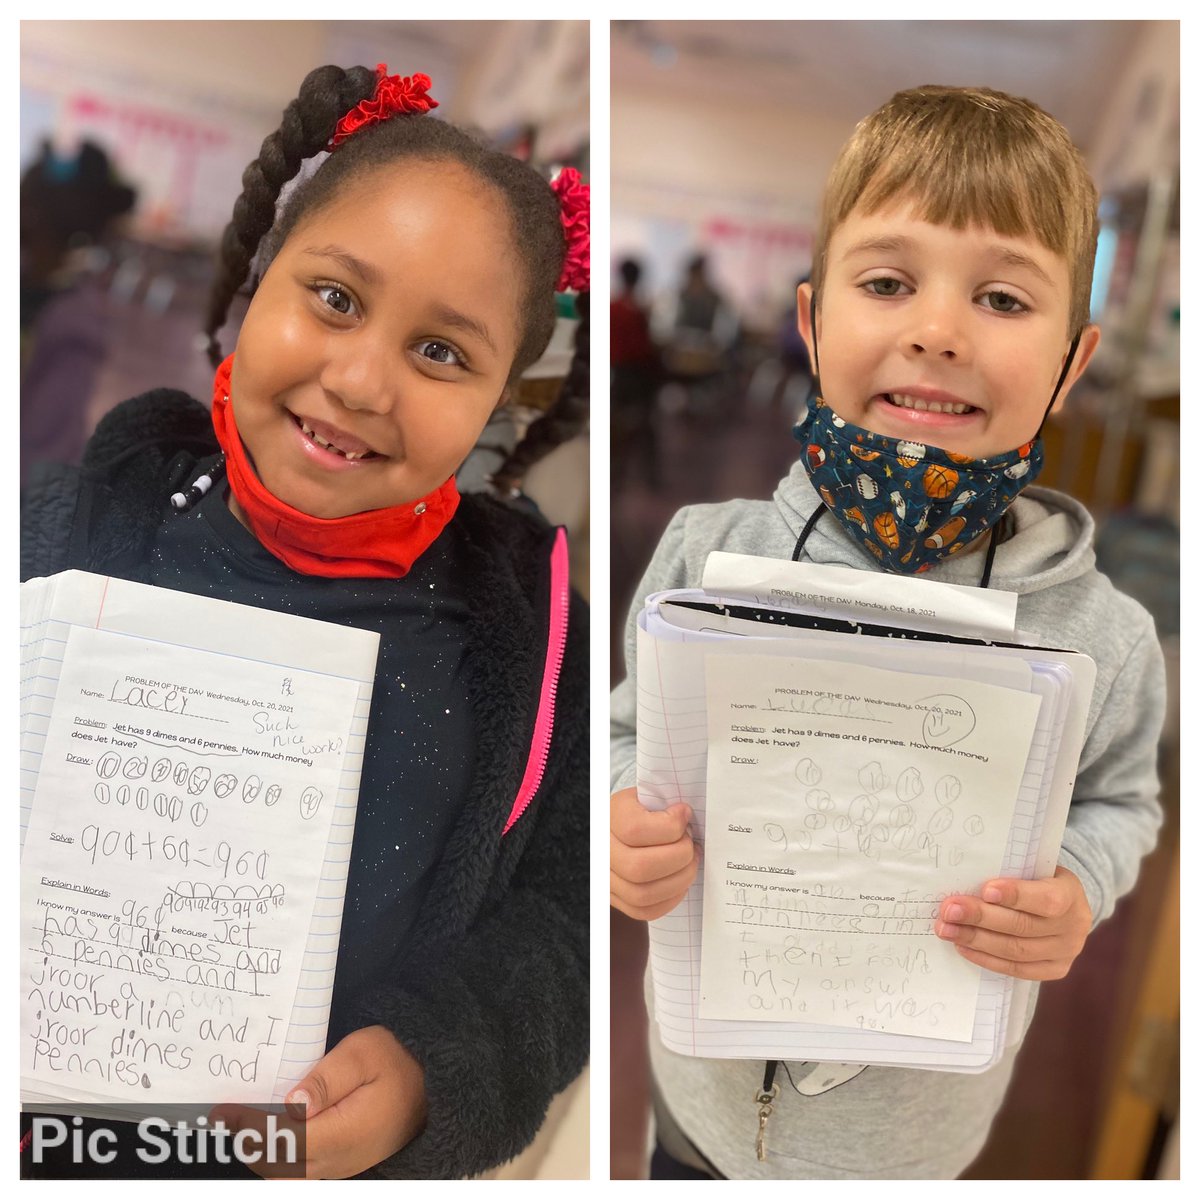 We don’t play with Problem of the Day! Just a couple of my standout POTD performers! @RCE_HCS #fueledbyenthusiasm #drivenbysuccess